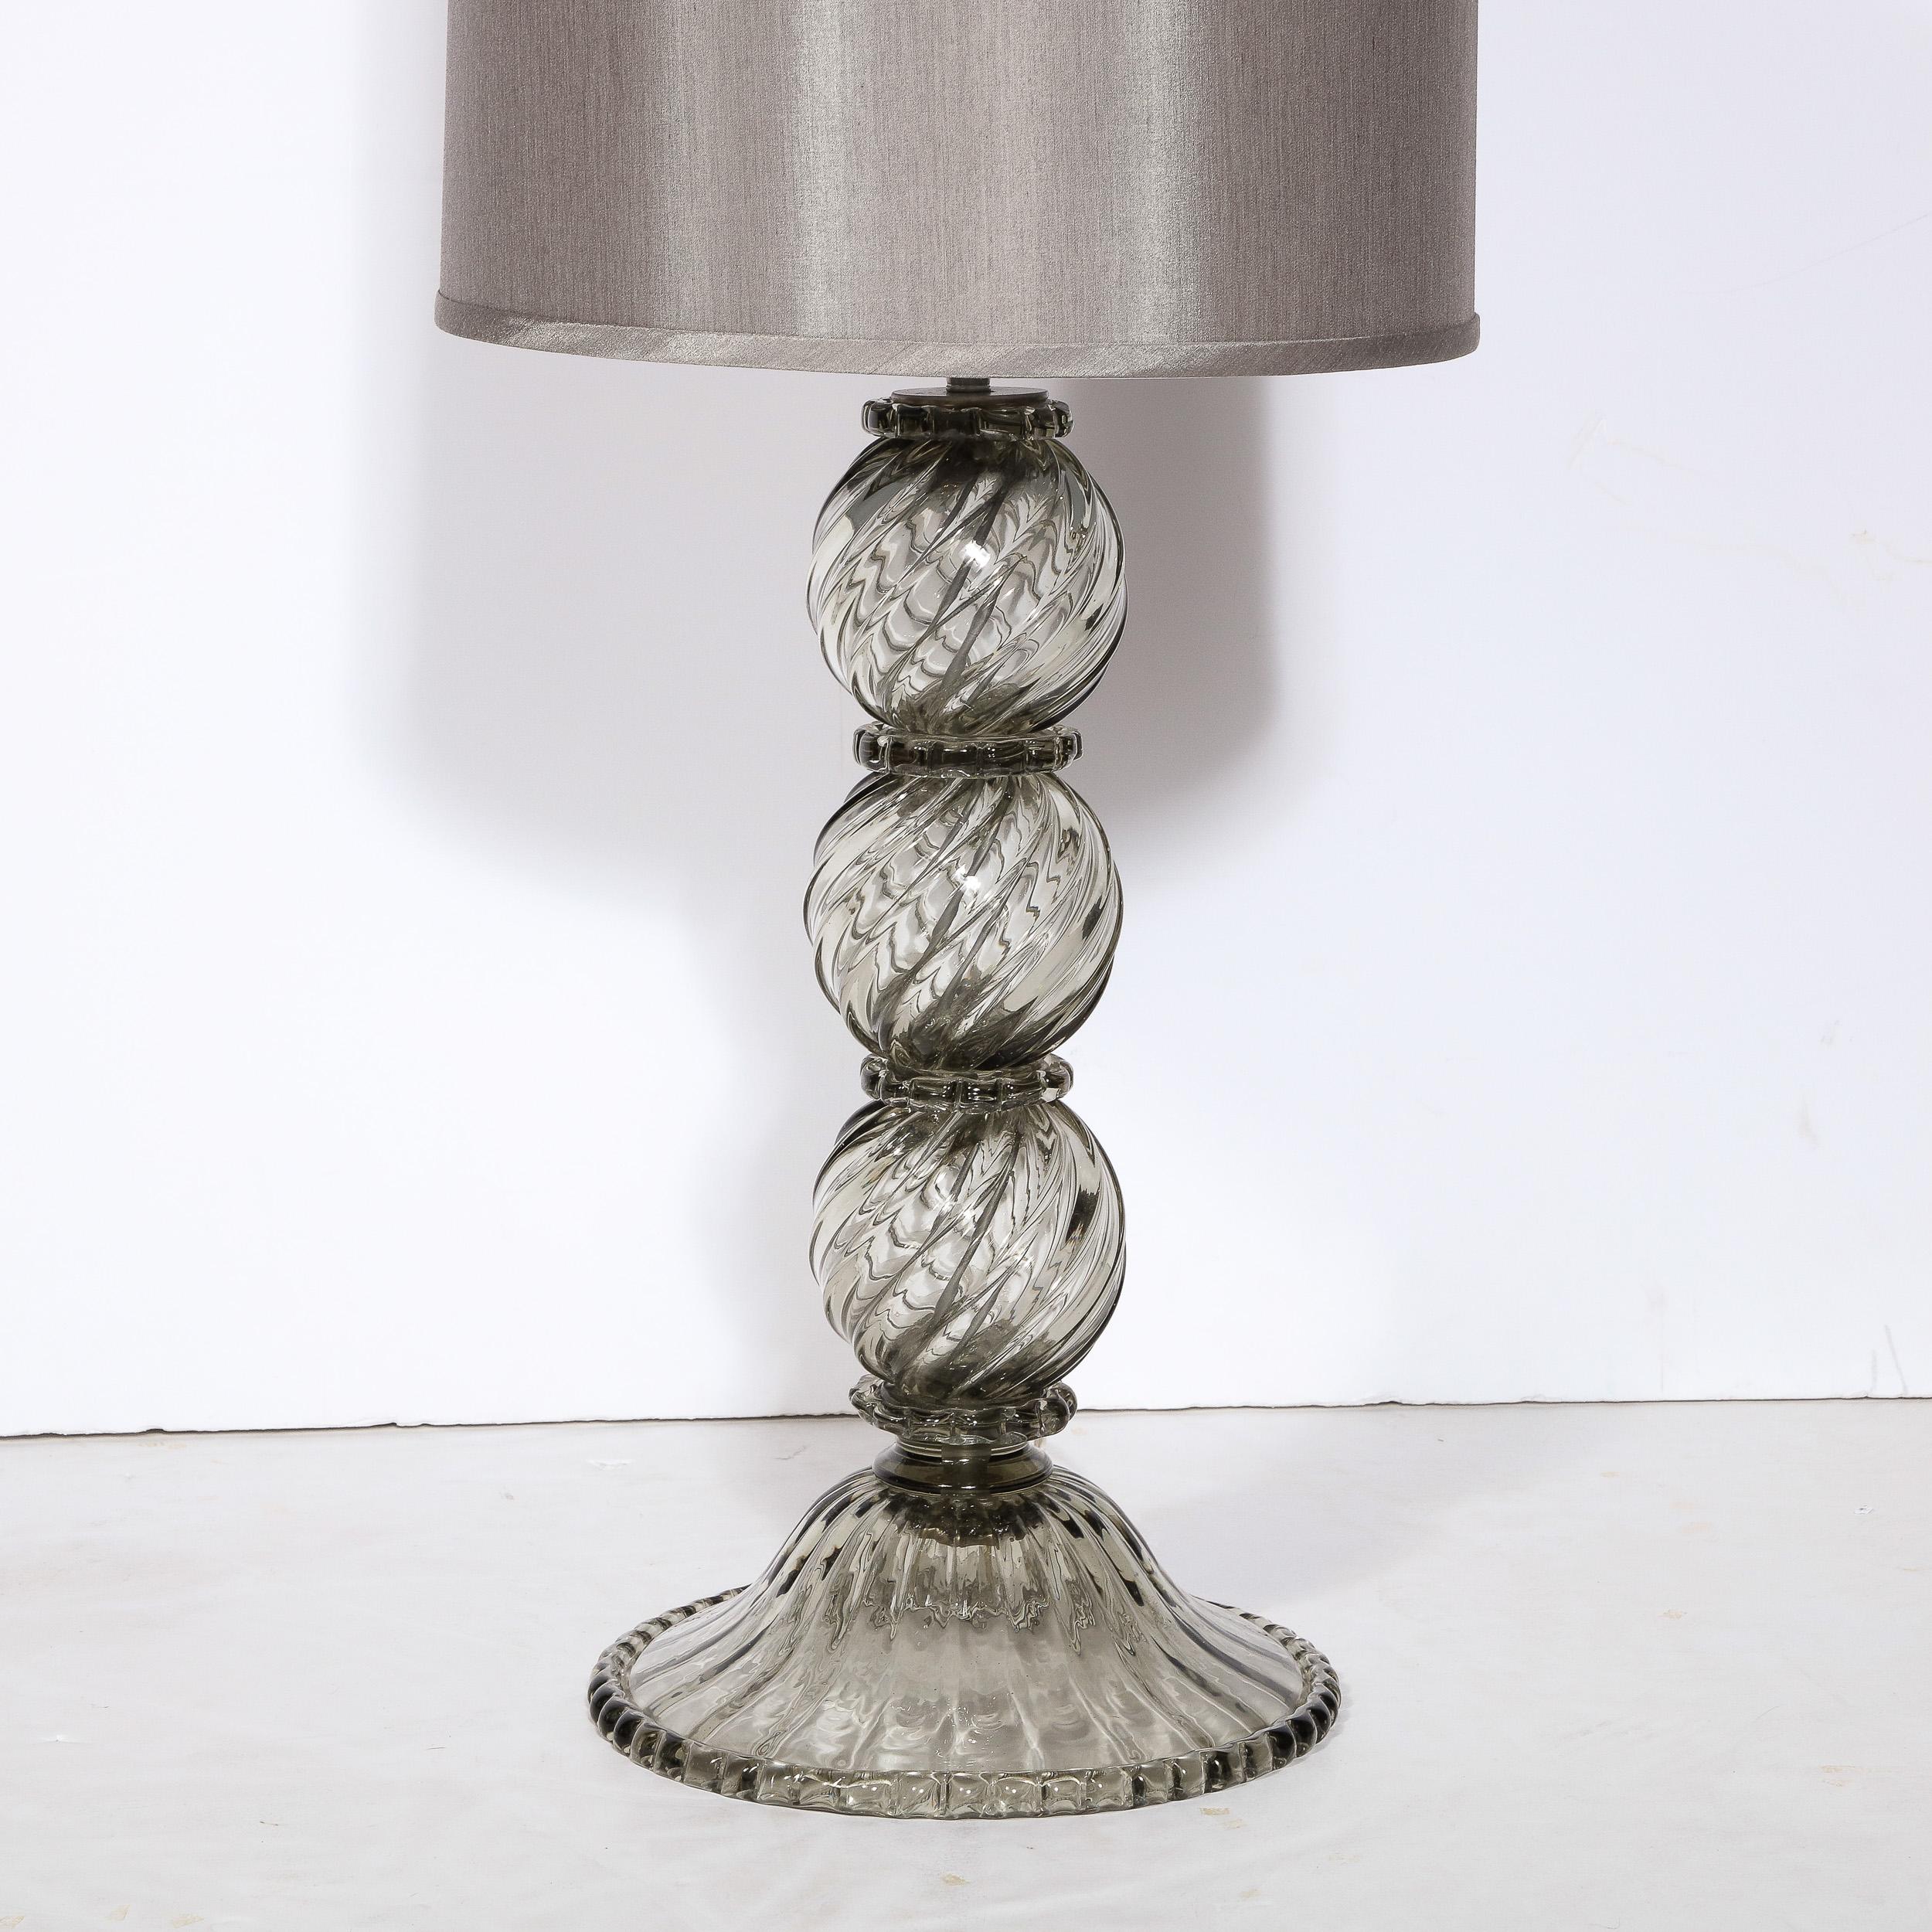 Italian Modernist Hand Blown Murano Smoked Glass Table Lamp with Scalloped Detailing For Sale